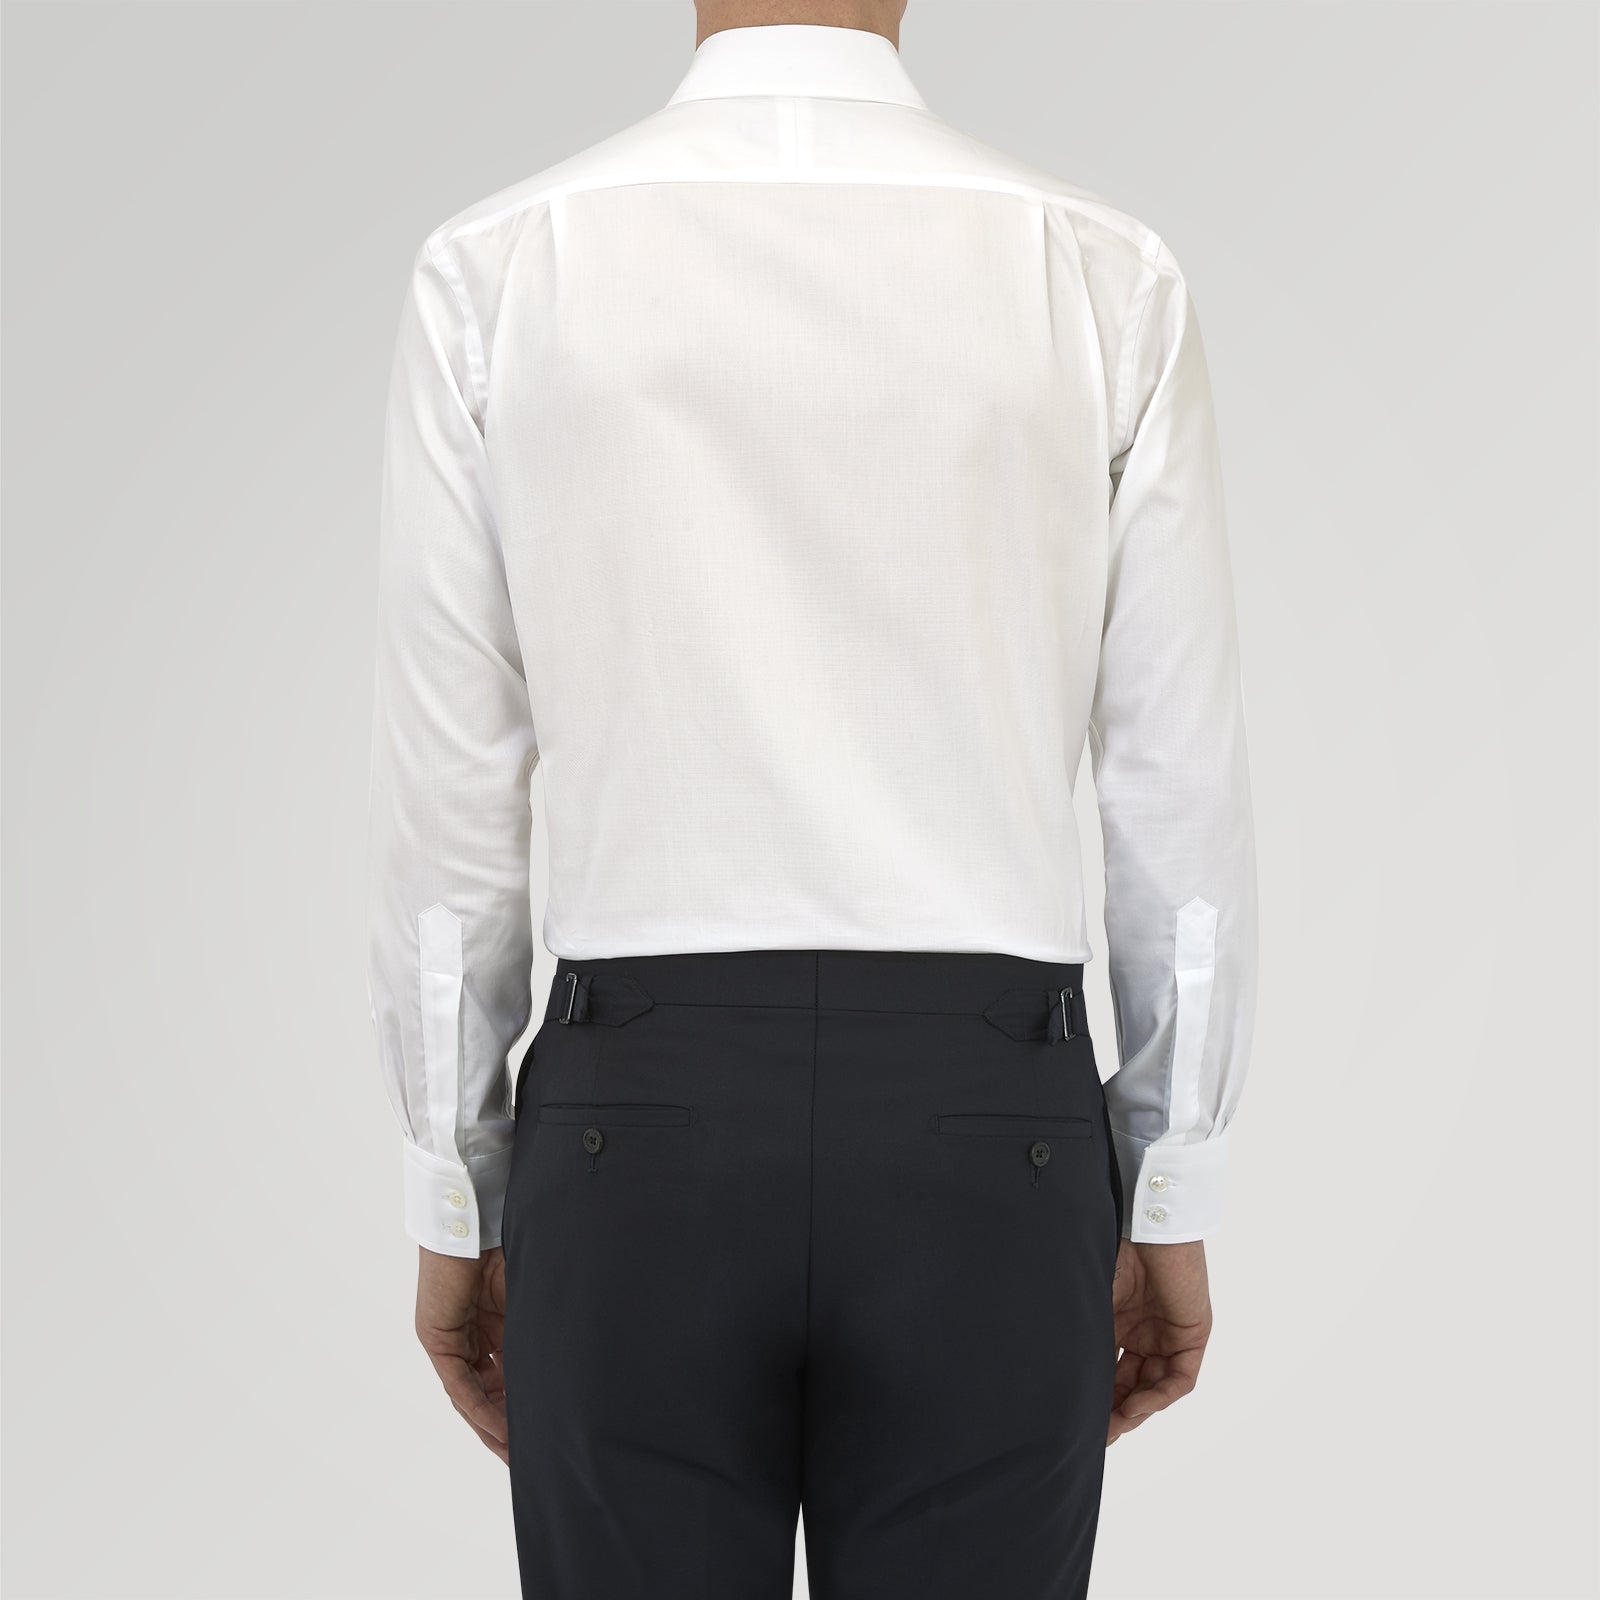 Tailored Fit White Royal Oxford Cotton Shirt with Kent Collar and 2-Button Cuffs